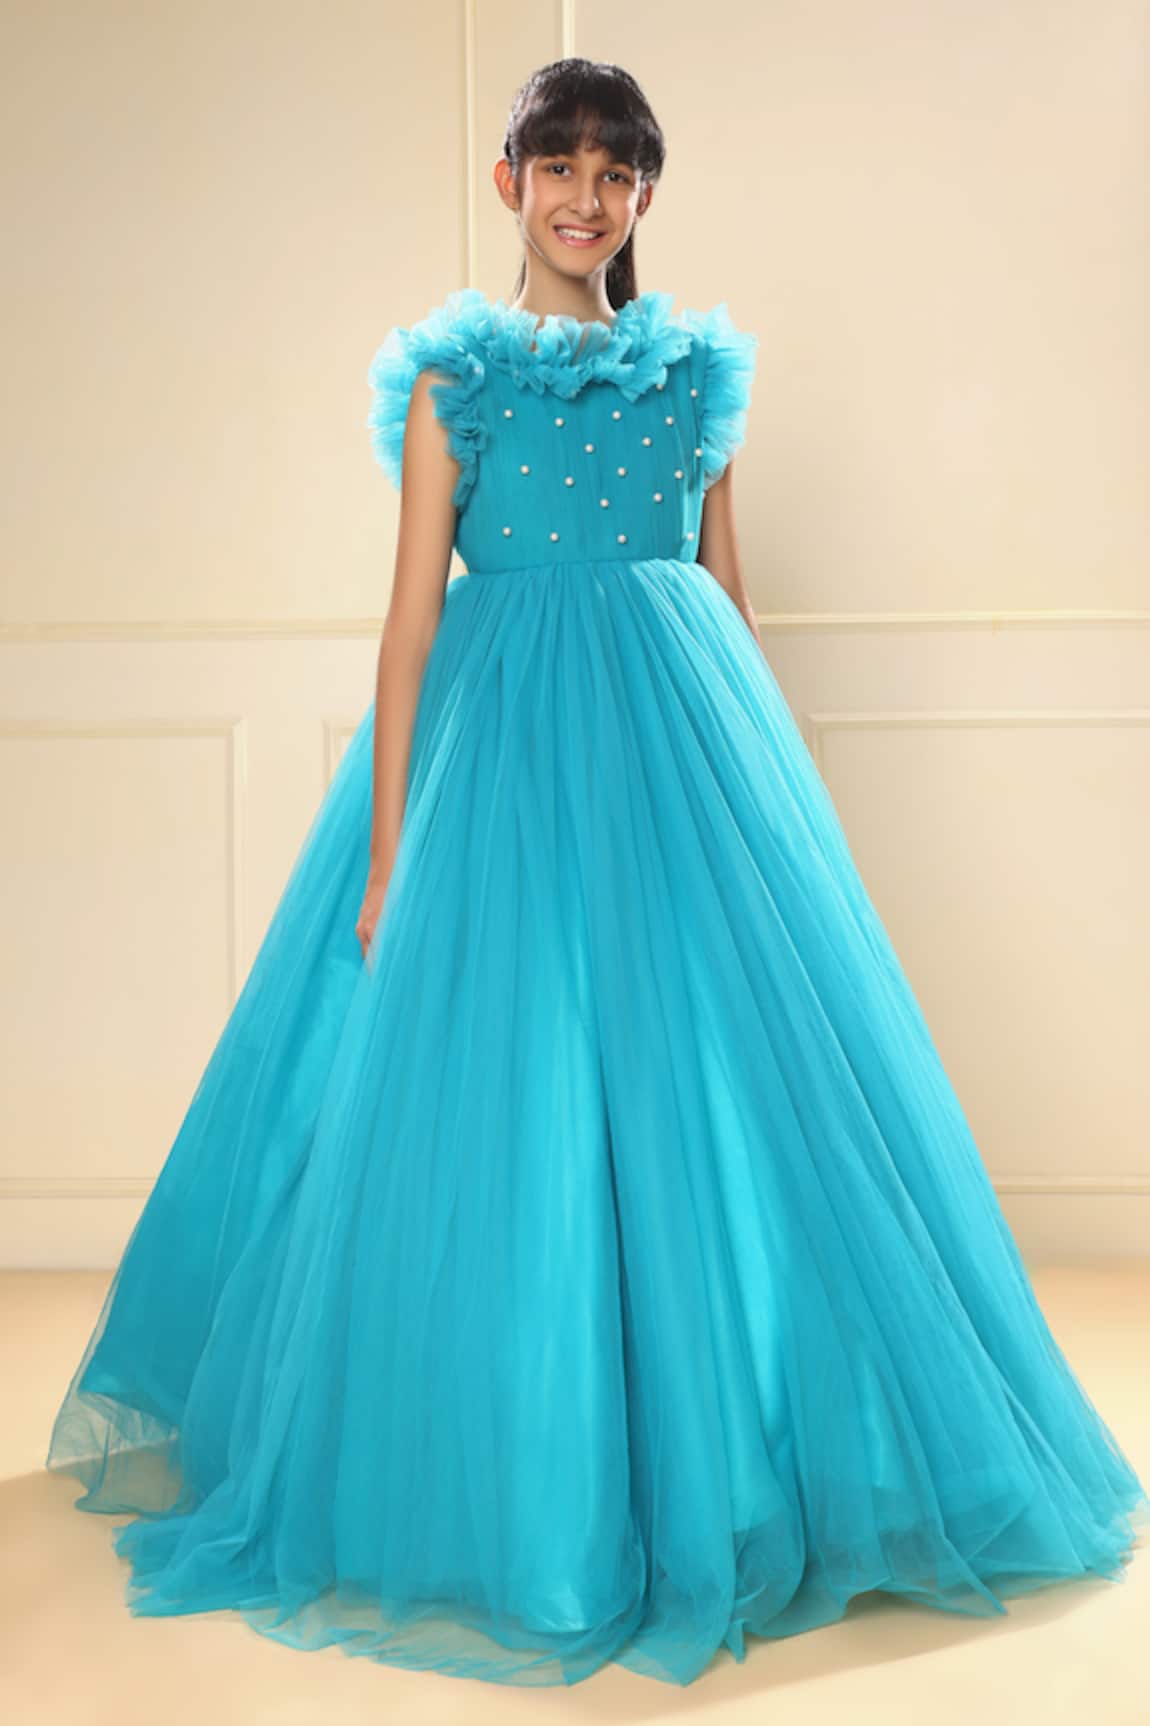 LittleCheer Pearl Embellished Bodice Ball Gown